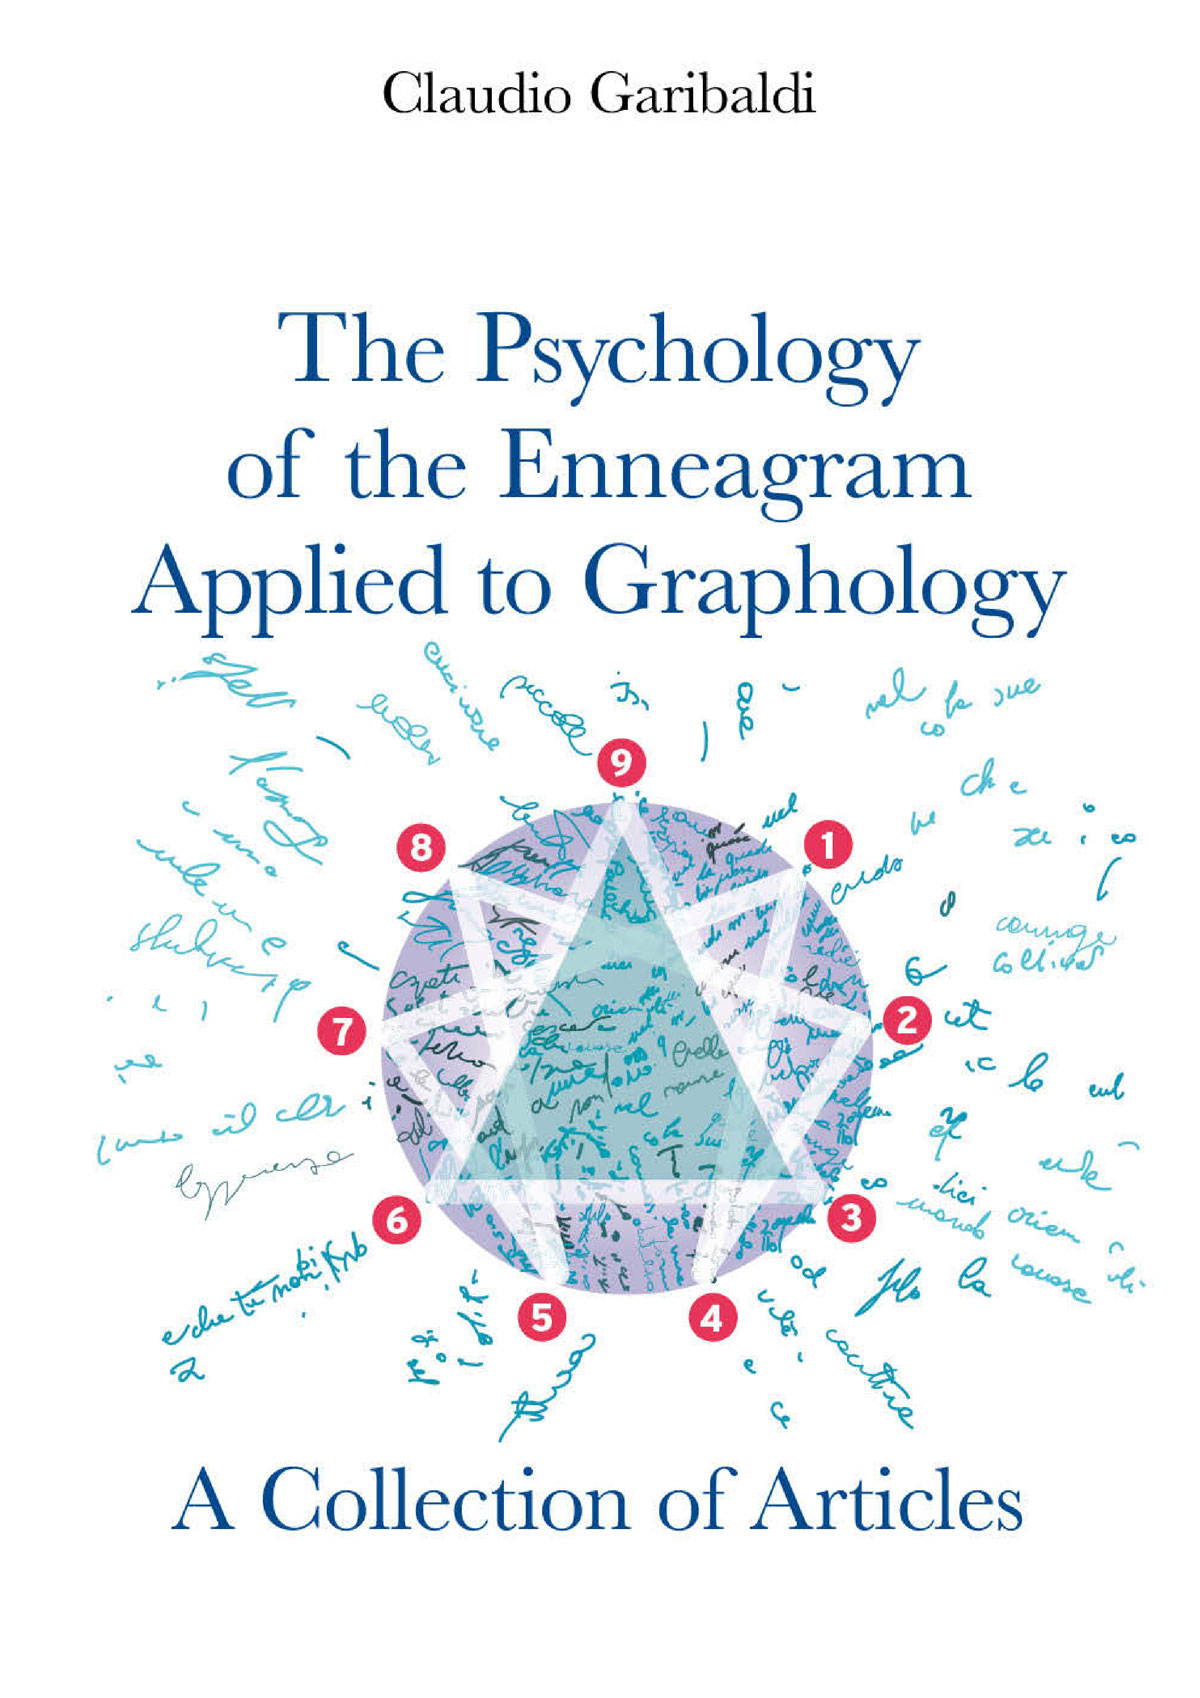 The Psychology of the Enneagram Applied to Graphology - A Collection of Articles "ENGLISH VERSION"